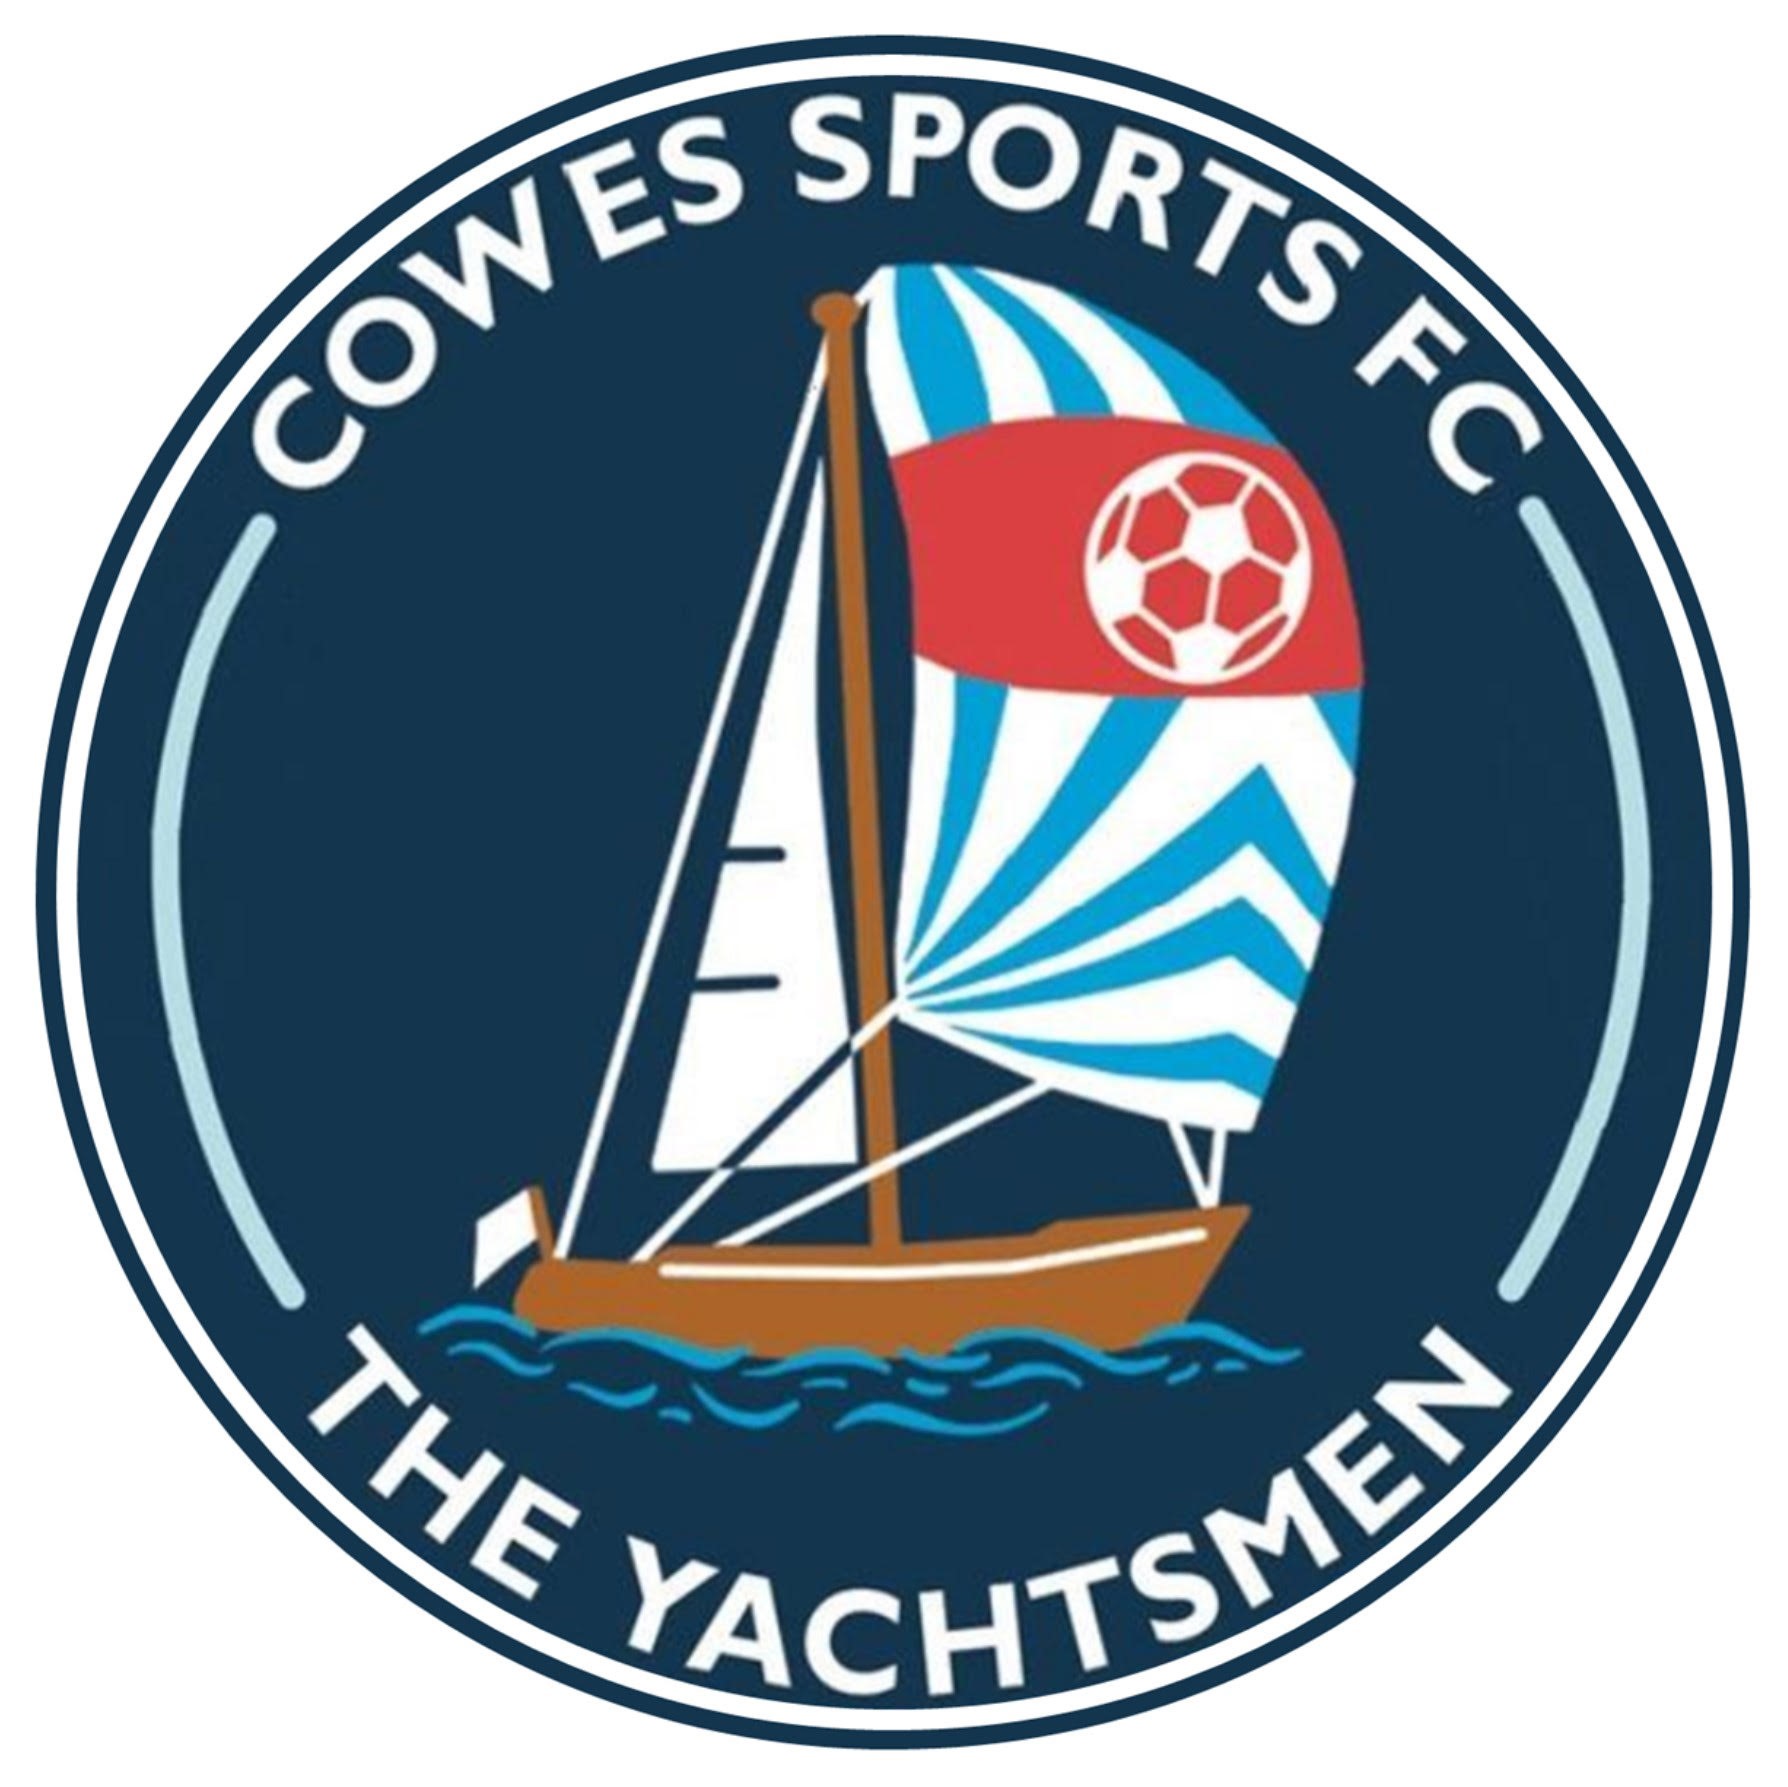 Cowes Sports F.C